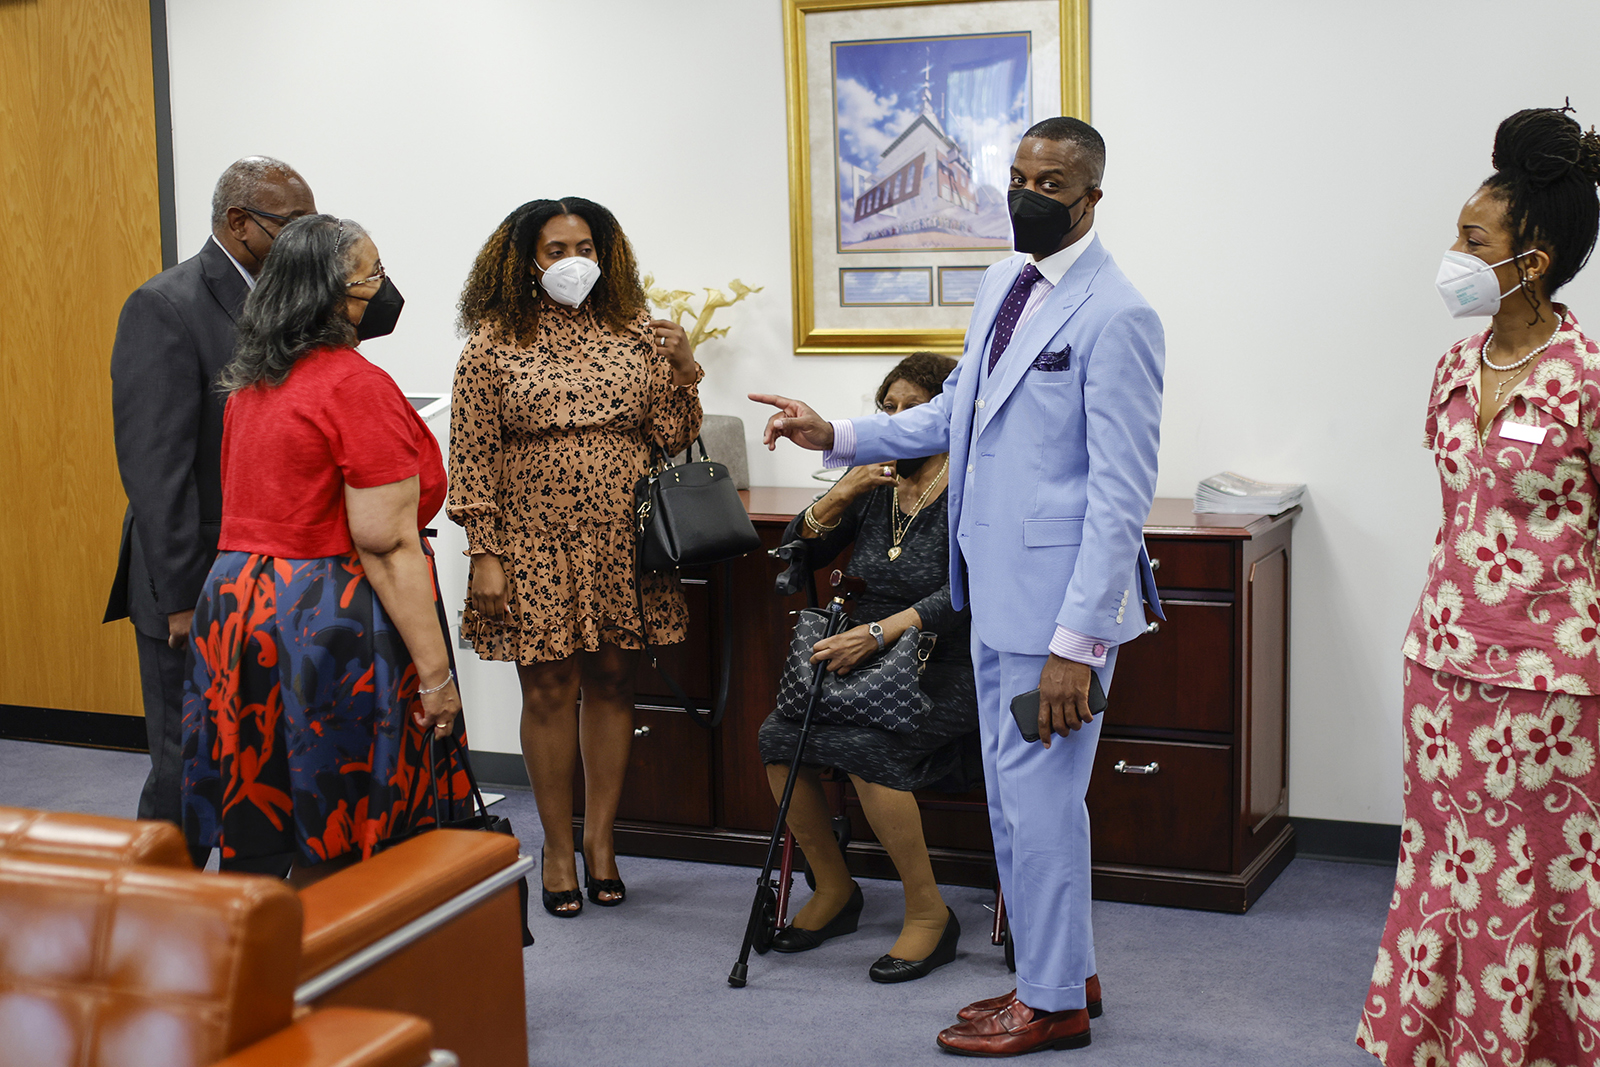 Rev. Dante Quick, speaks with worshipers after preaching during a church service at the First Baptist Church of Lincoln Gardens on Sunday, May 22, 2022, in Somerset, N.J. (AP Photo/Eduardo Munoz Alvarez)